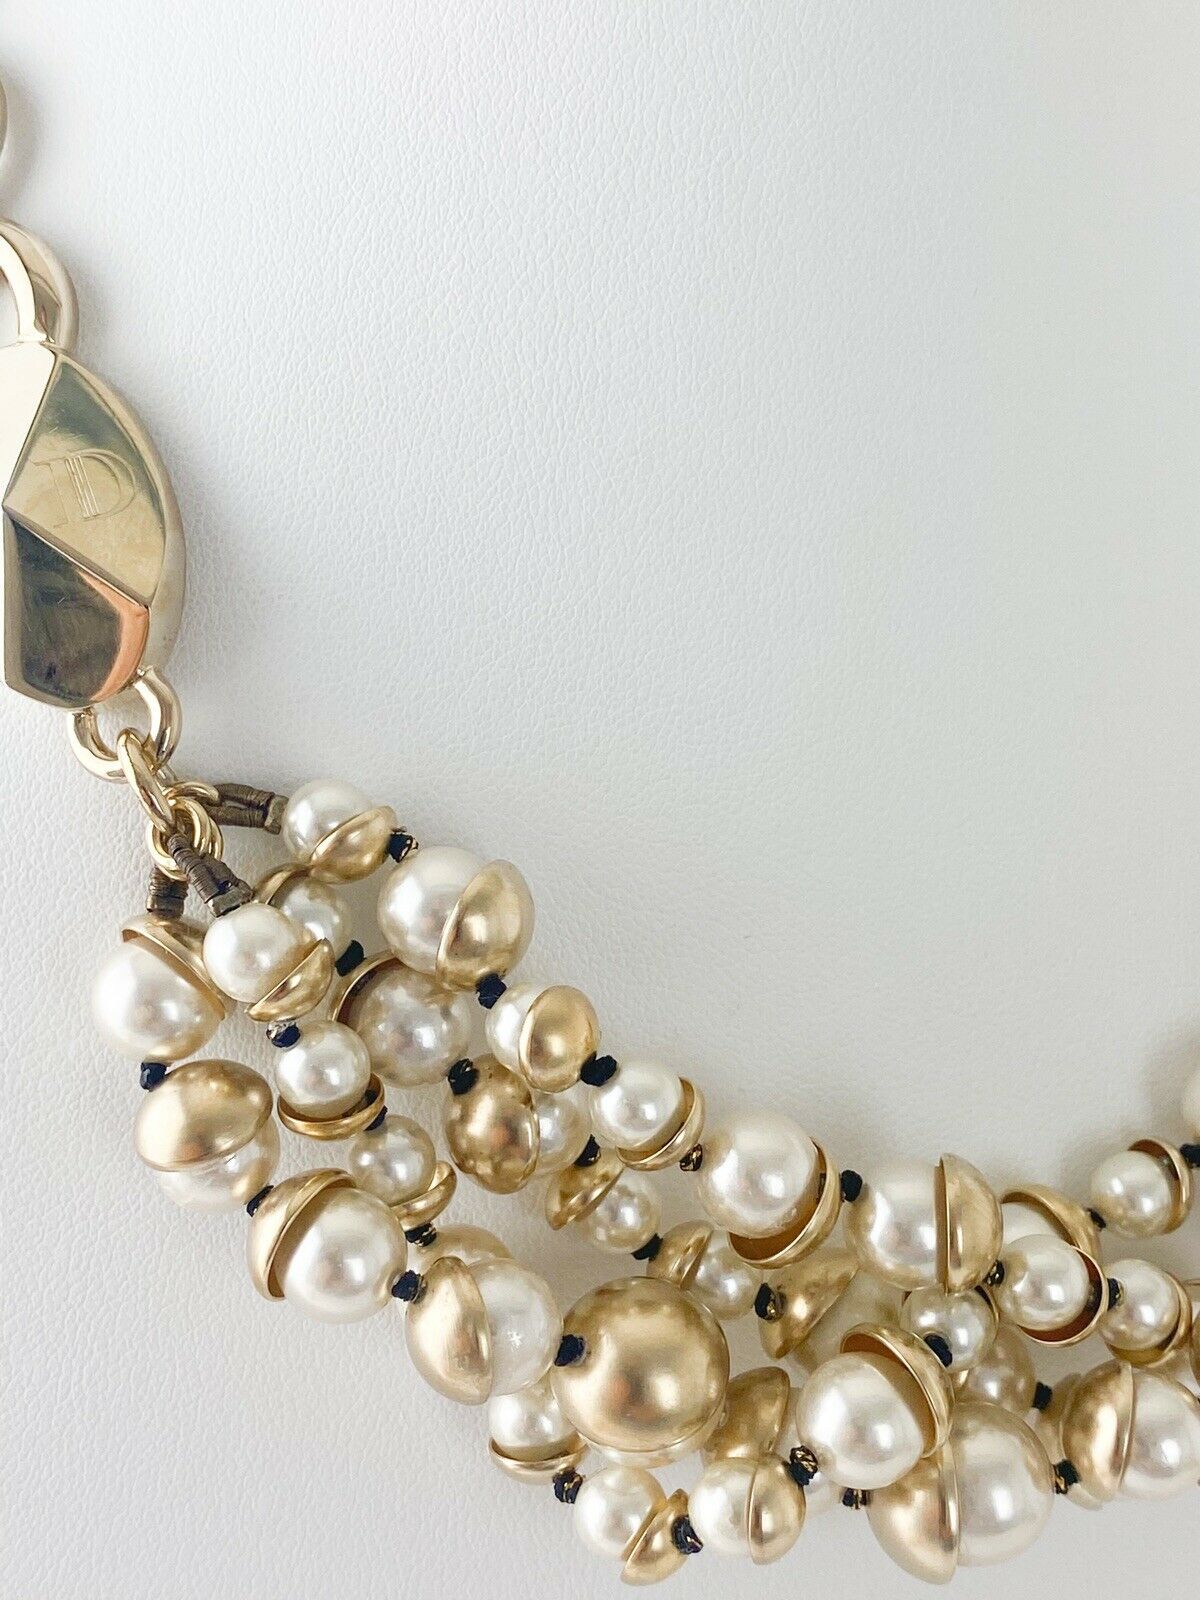 【SOLD OUT】Christian Dior Mise en Dior Vintage Gold Tone Multi-Strand Choker Necklace Faux Pearl